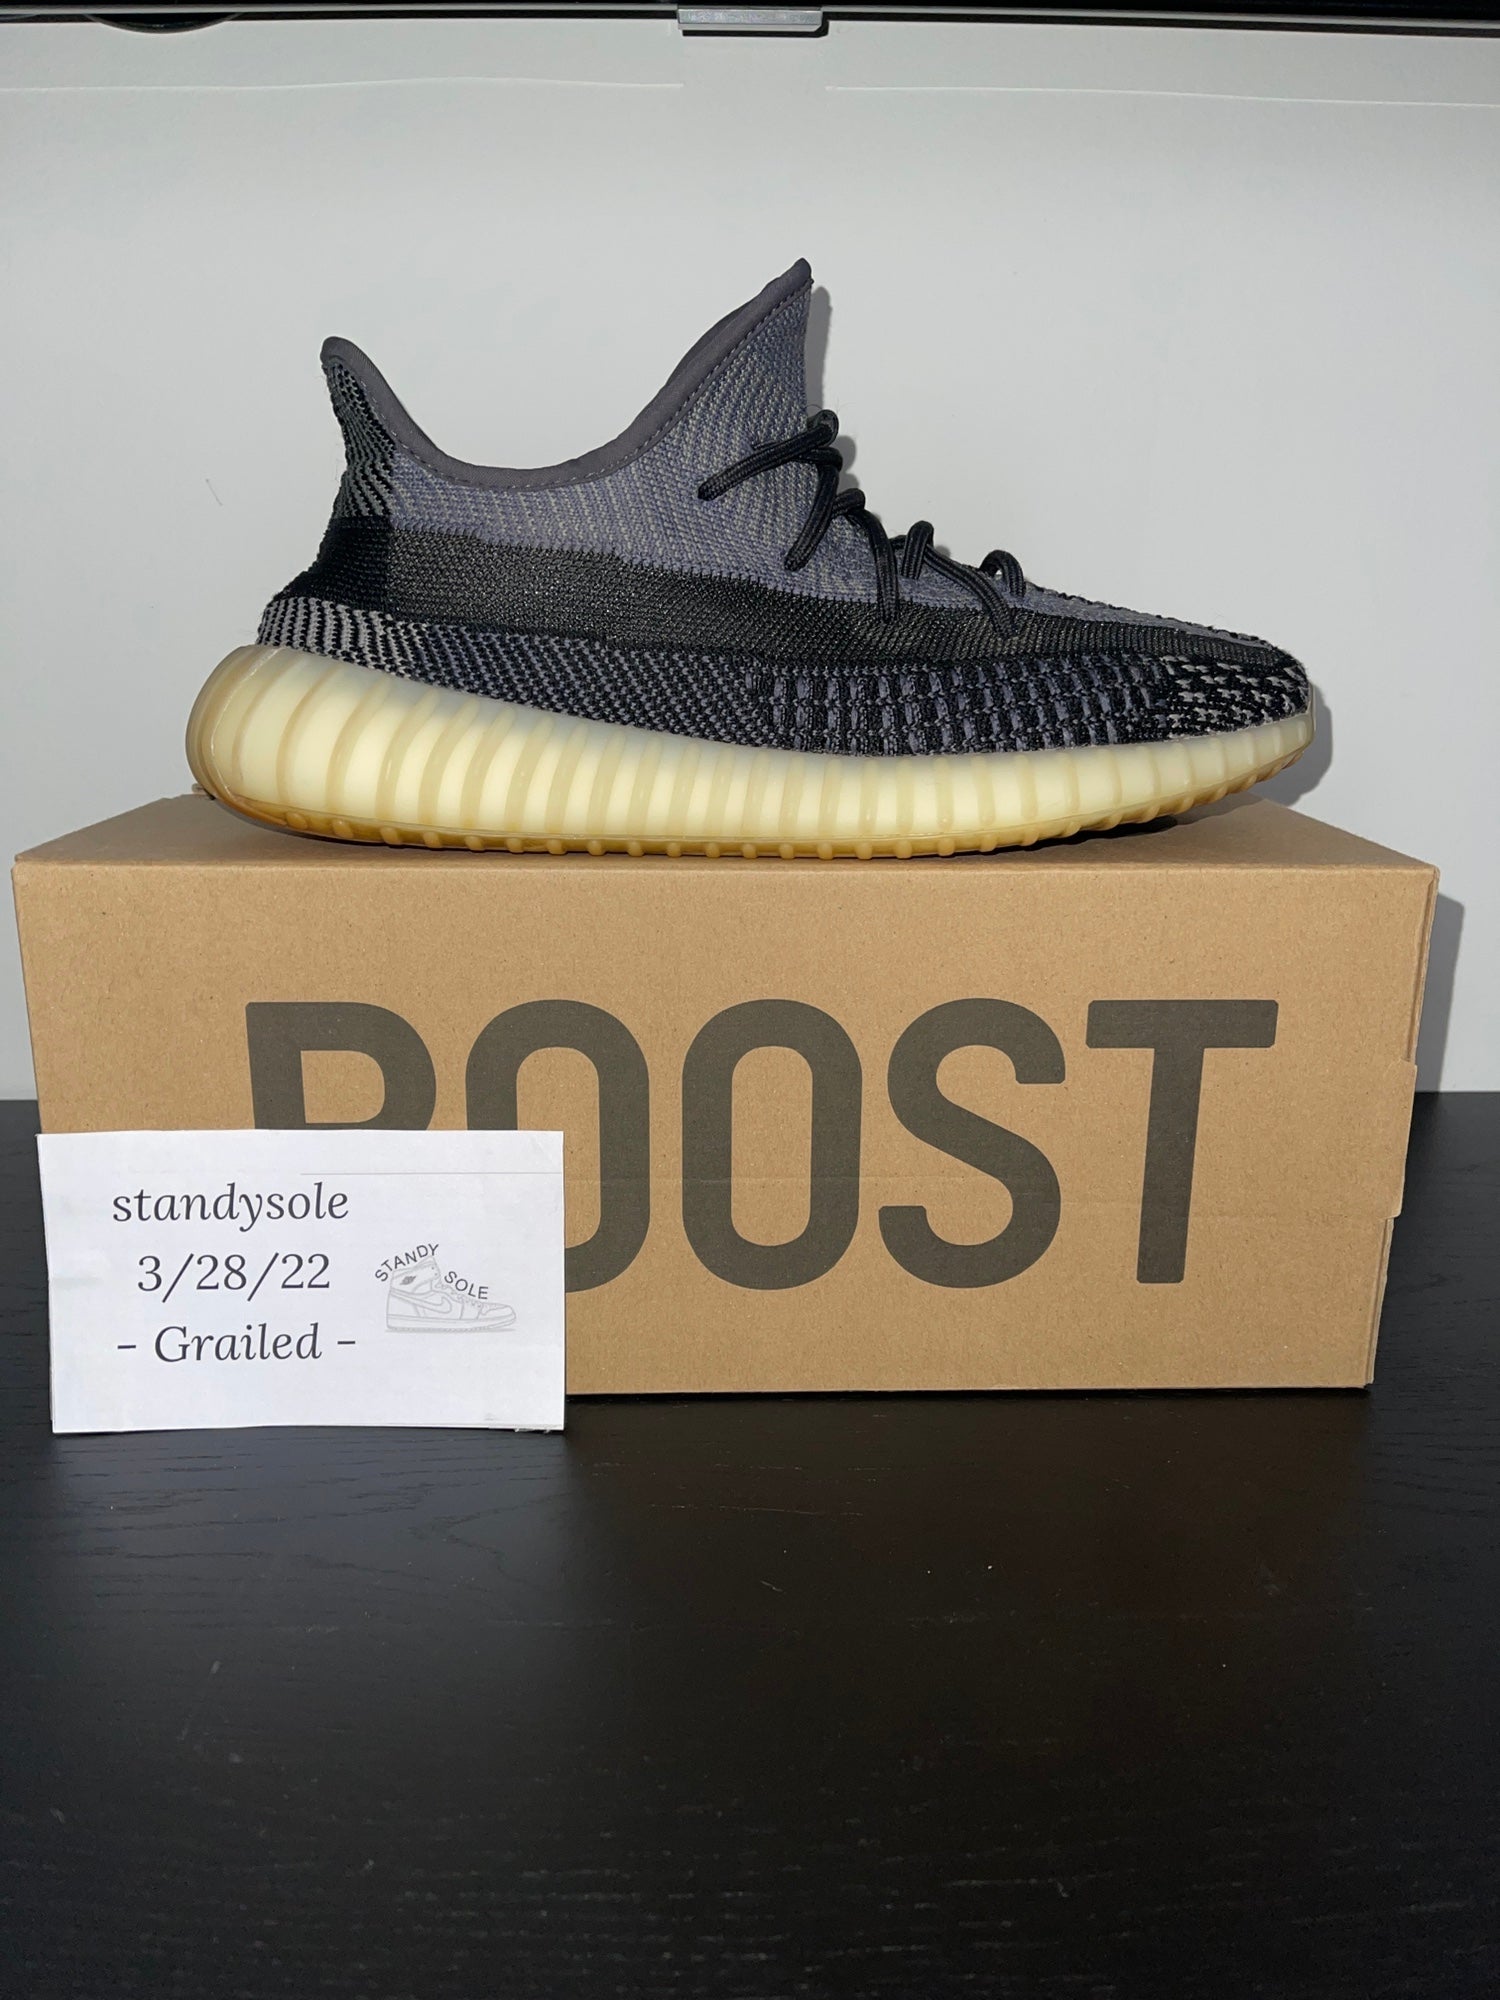 Yeezy Boost 350 v2 Carbon | SidelineSwap